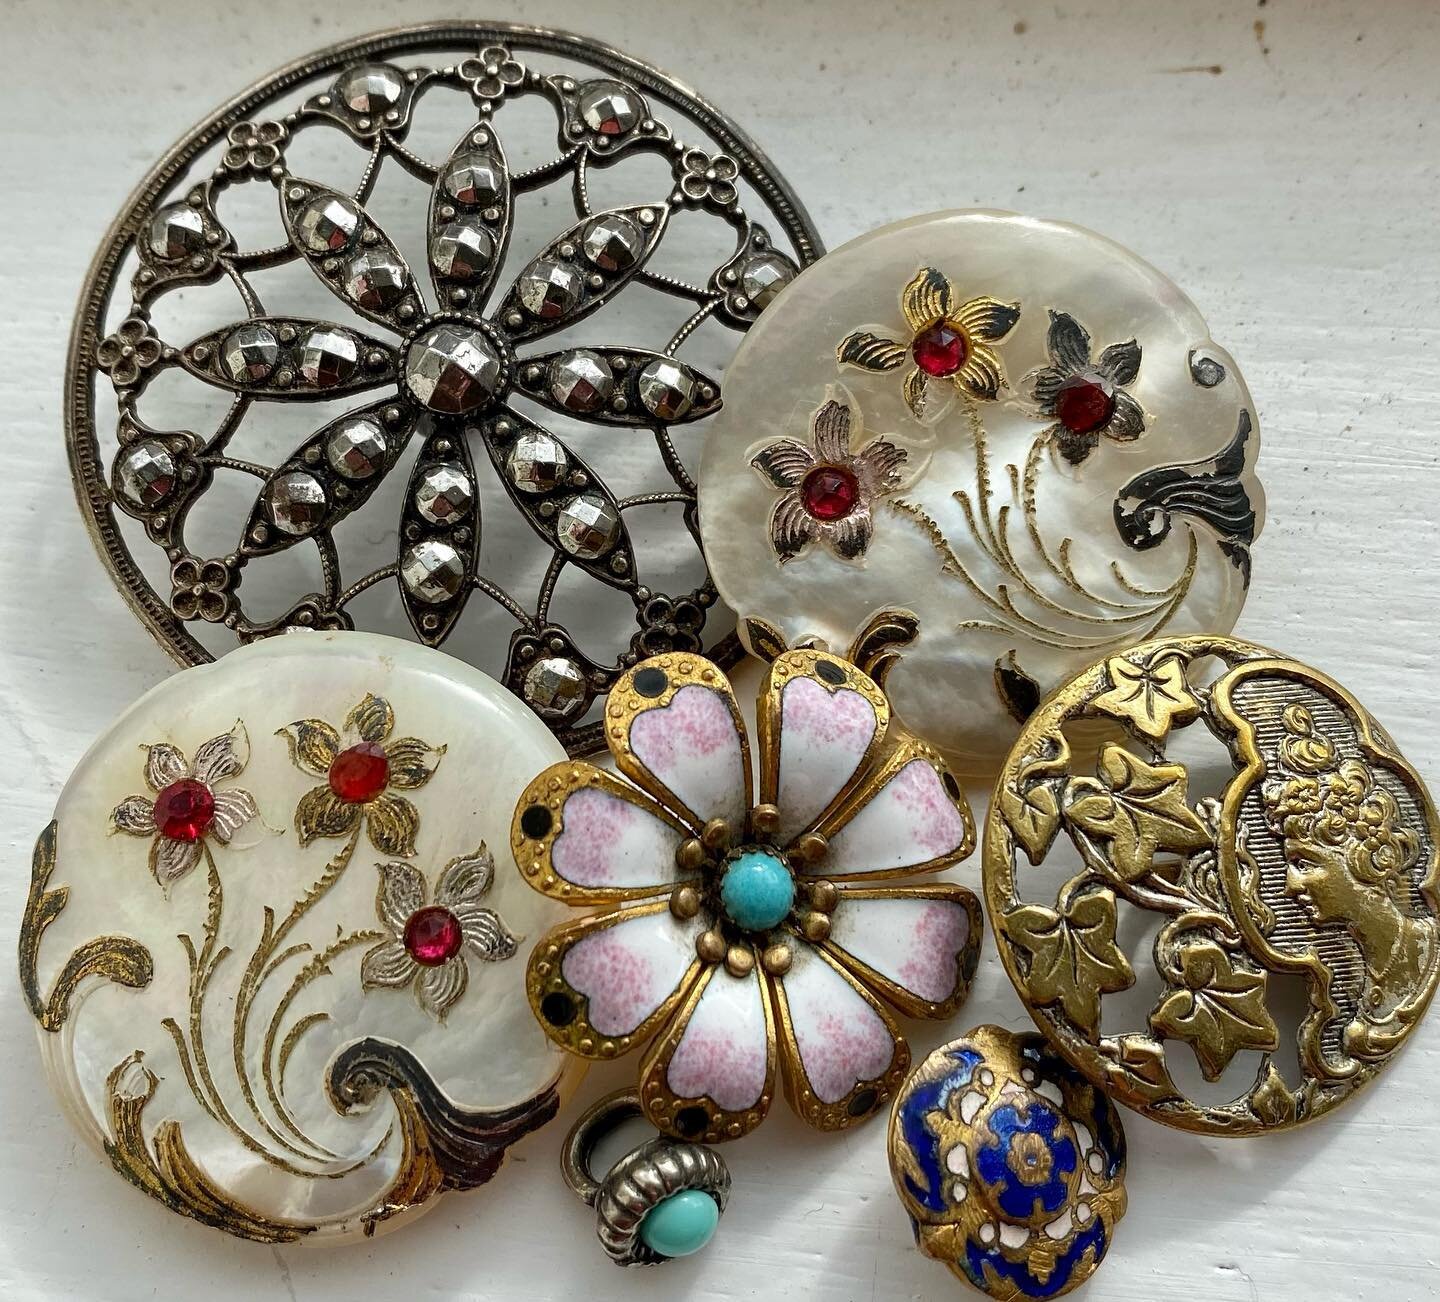 Some more lovely old buttons added to website today #antiquebuttons #antiquemotherofpearl #enamelbuttons #www.vintagebuttonemporium.com